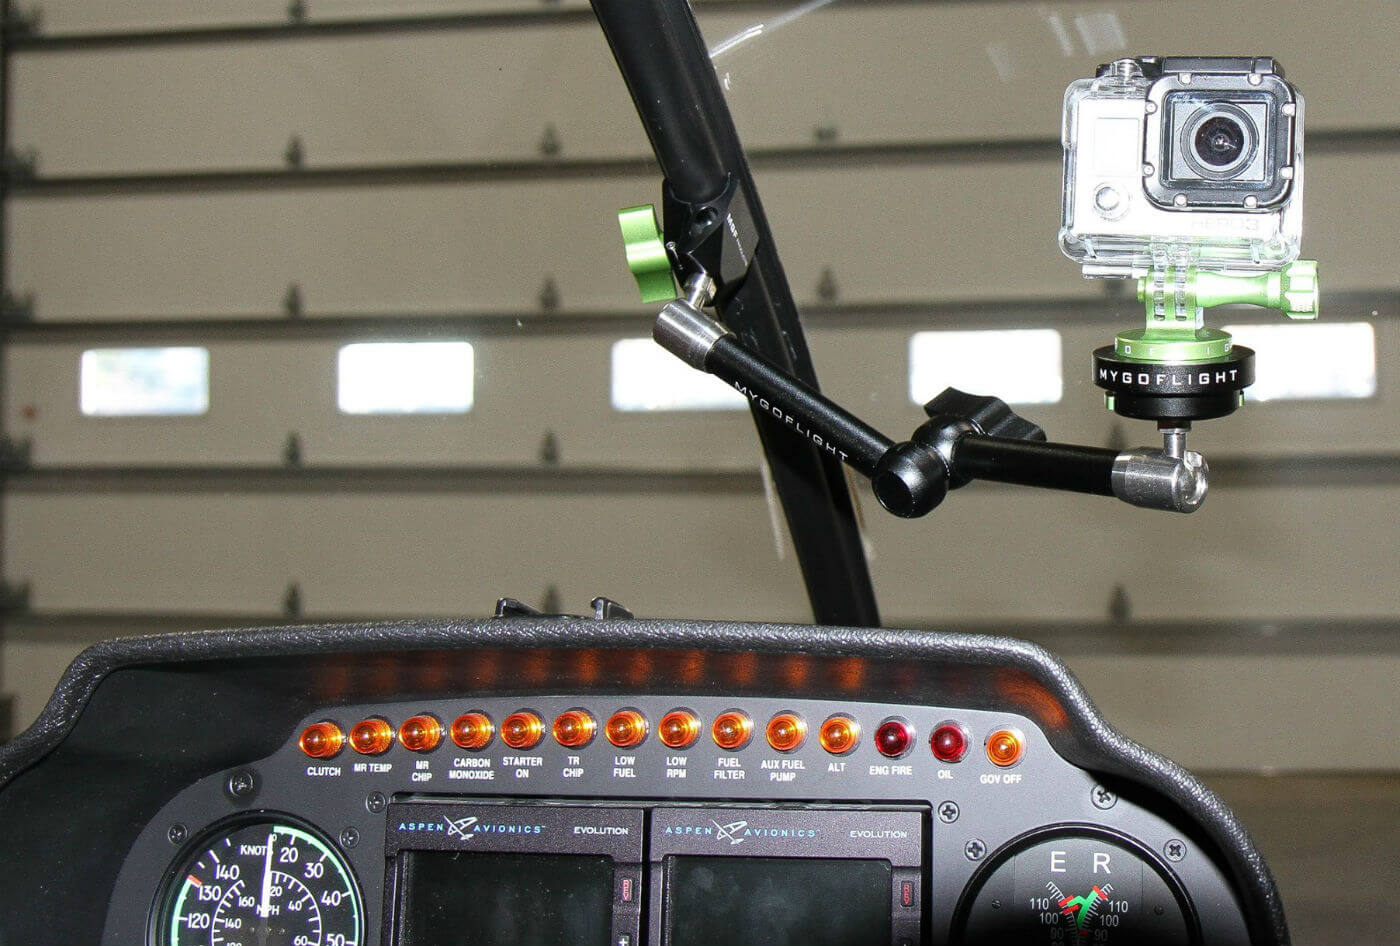 The Robinson Helicopter center spar mount (pictured here) works with the center spar on the windshield of Robinson R22, R44, and R66 helicopters. The mount is formed to the shape of the spar and is then tightened with the knob to secure it in place. MyGoFlight Photo